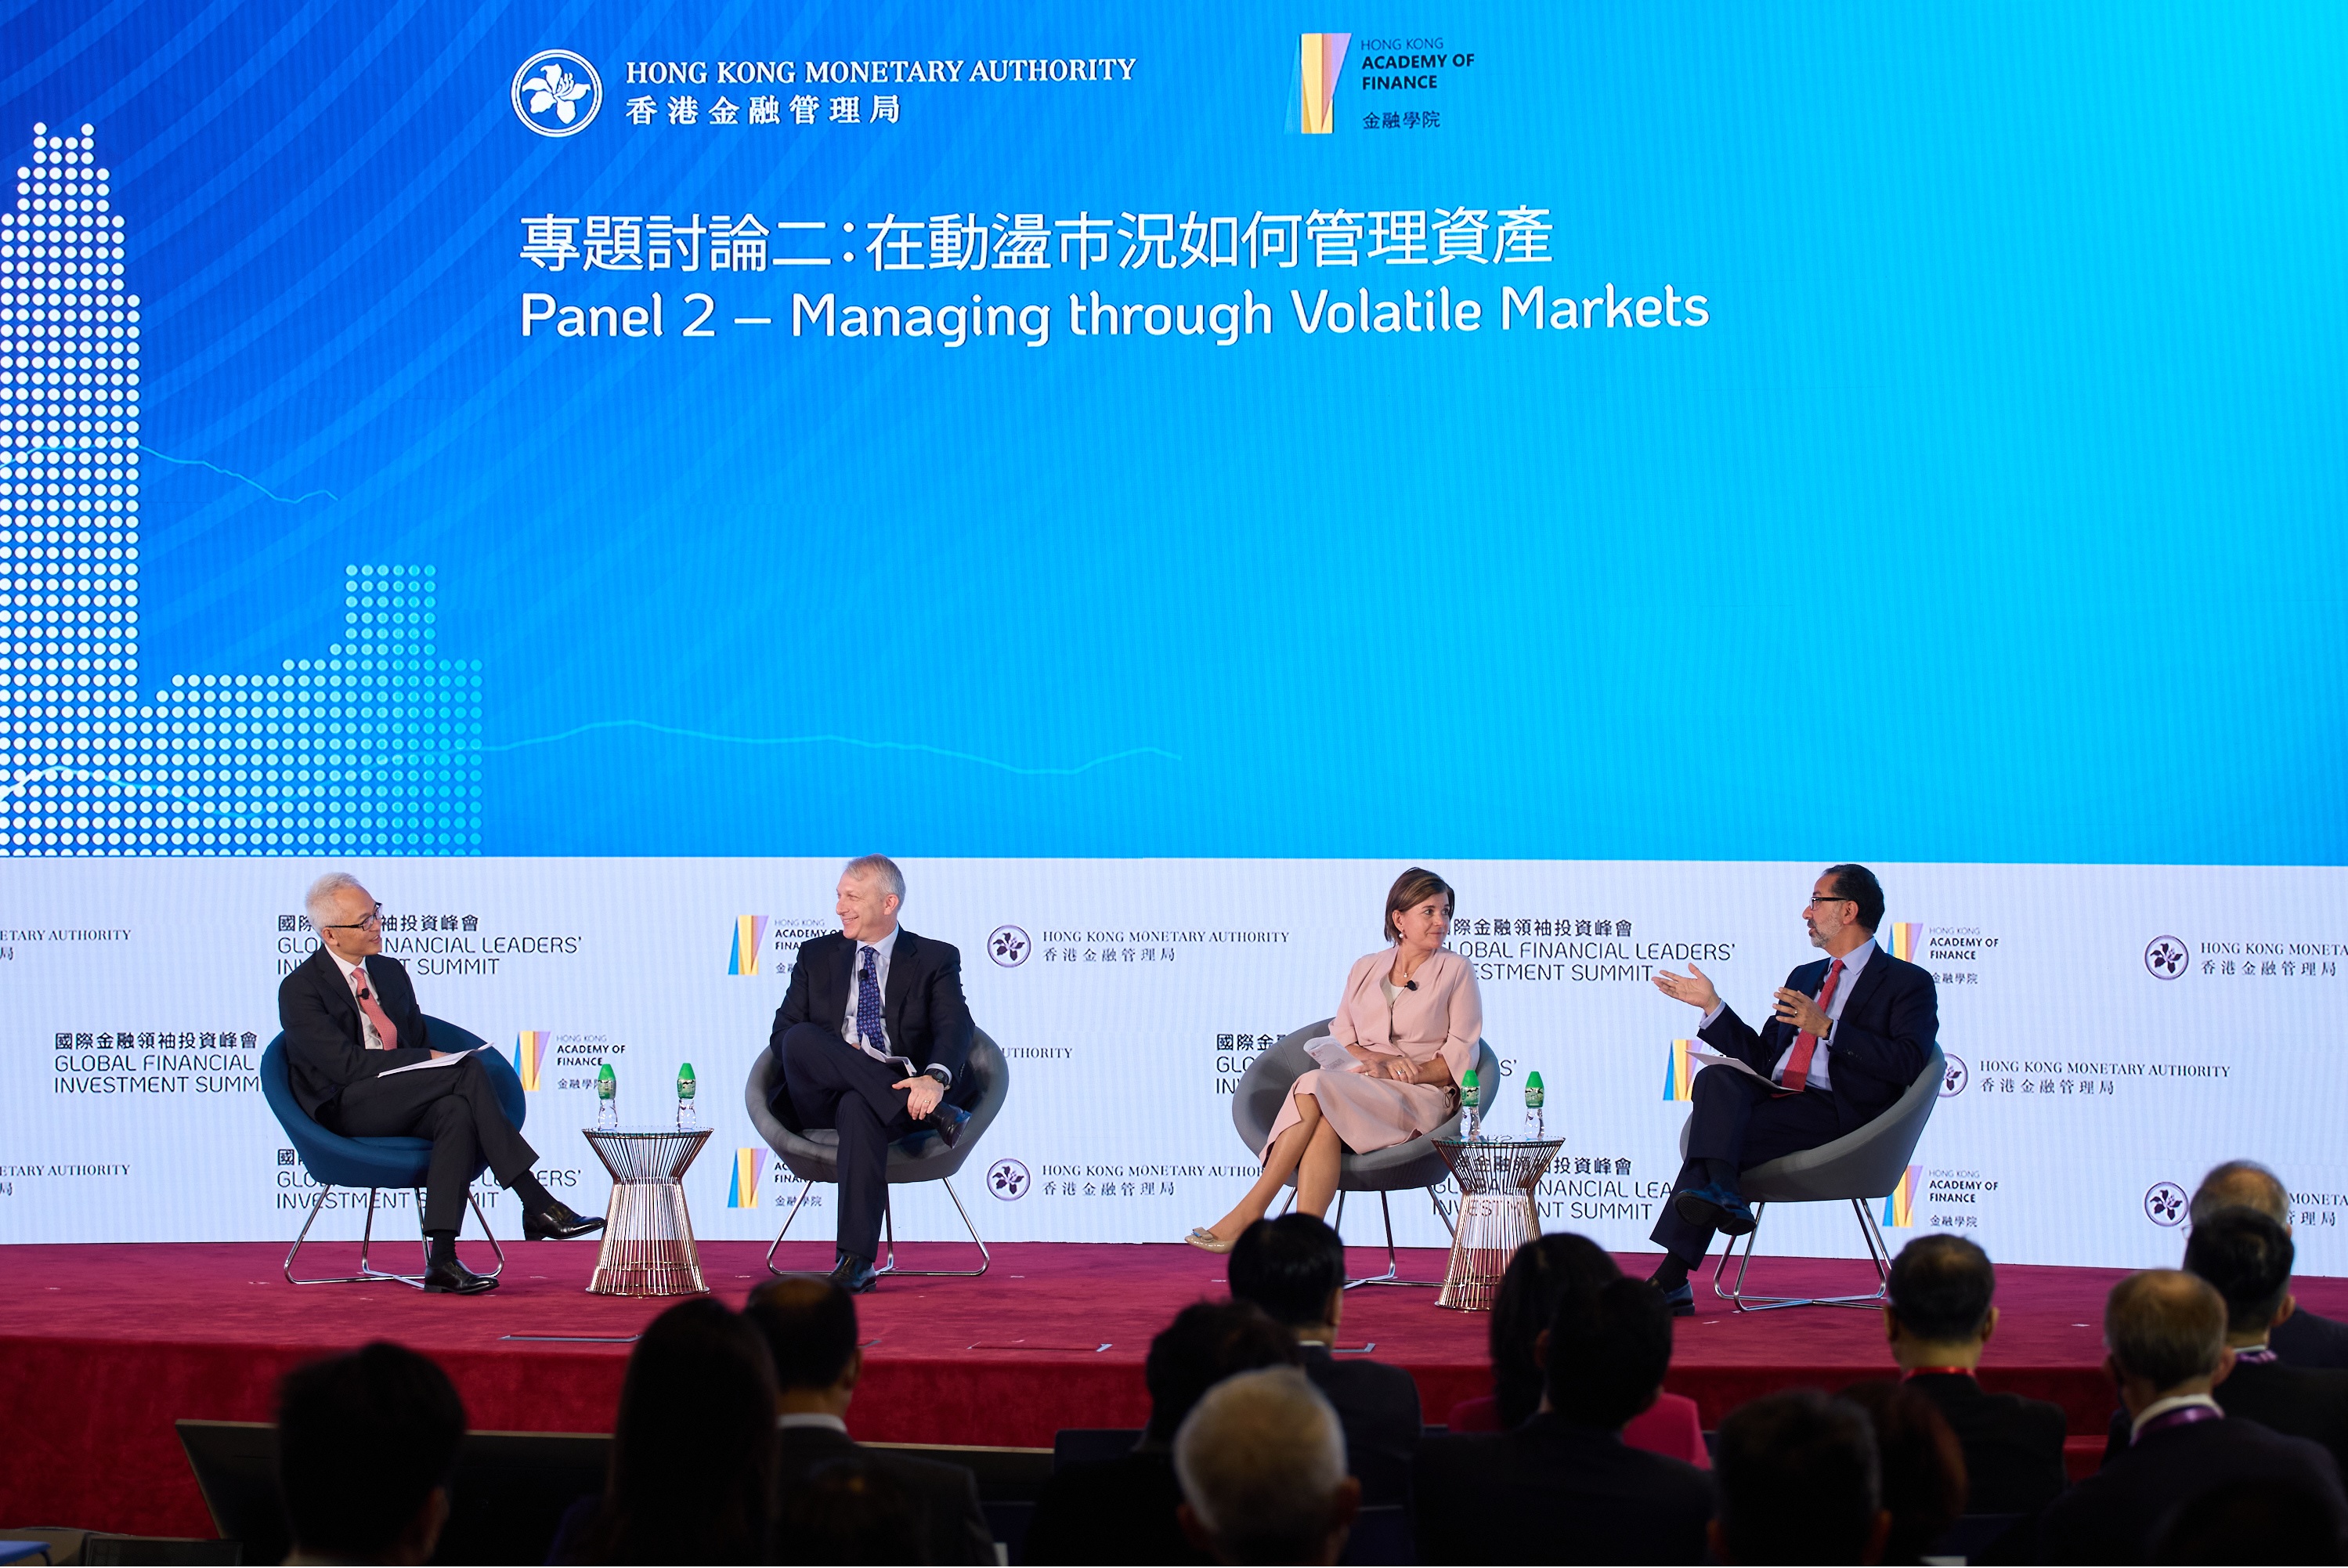 Mr Howard Lee, Deputy Chief Executive of the Hong Kong Monetary Authority moderates a panel discussion on “Managing through Volatile Markets” at the “Conversations with Global Investors” seminar of the Global Financial Leaders’ Investment Summit on 3 November, and is joined by Mr Stephen Klar, President & Managing Partner of Wellington Management; Ms Hanneke Smits, Chief Executive Officer of BNY Mellon Investment Management; and Mr Cyrus Taraporevala, President and CEO of State Street Global Advisors.